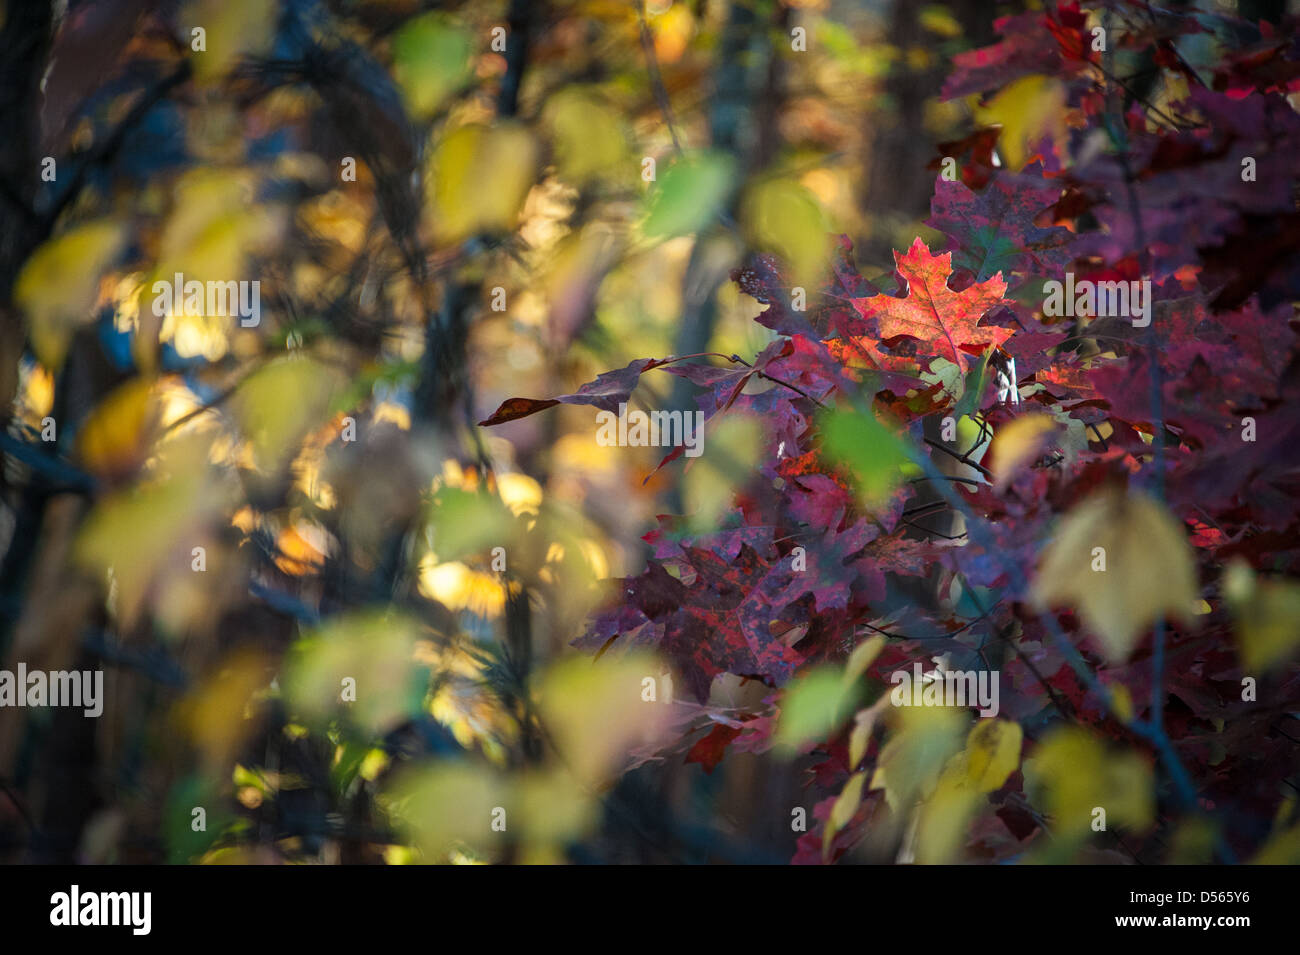 The blurry abstract colors of Fall surround a bright Autumn leaf in focus. Stock Photo